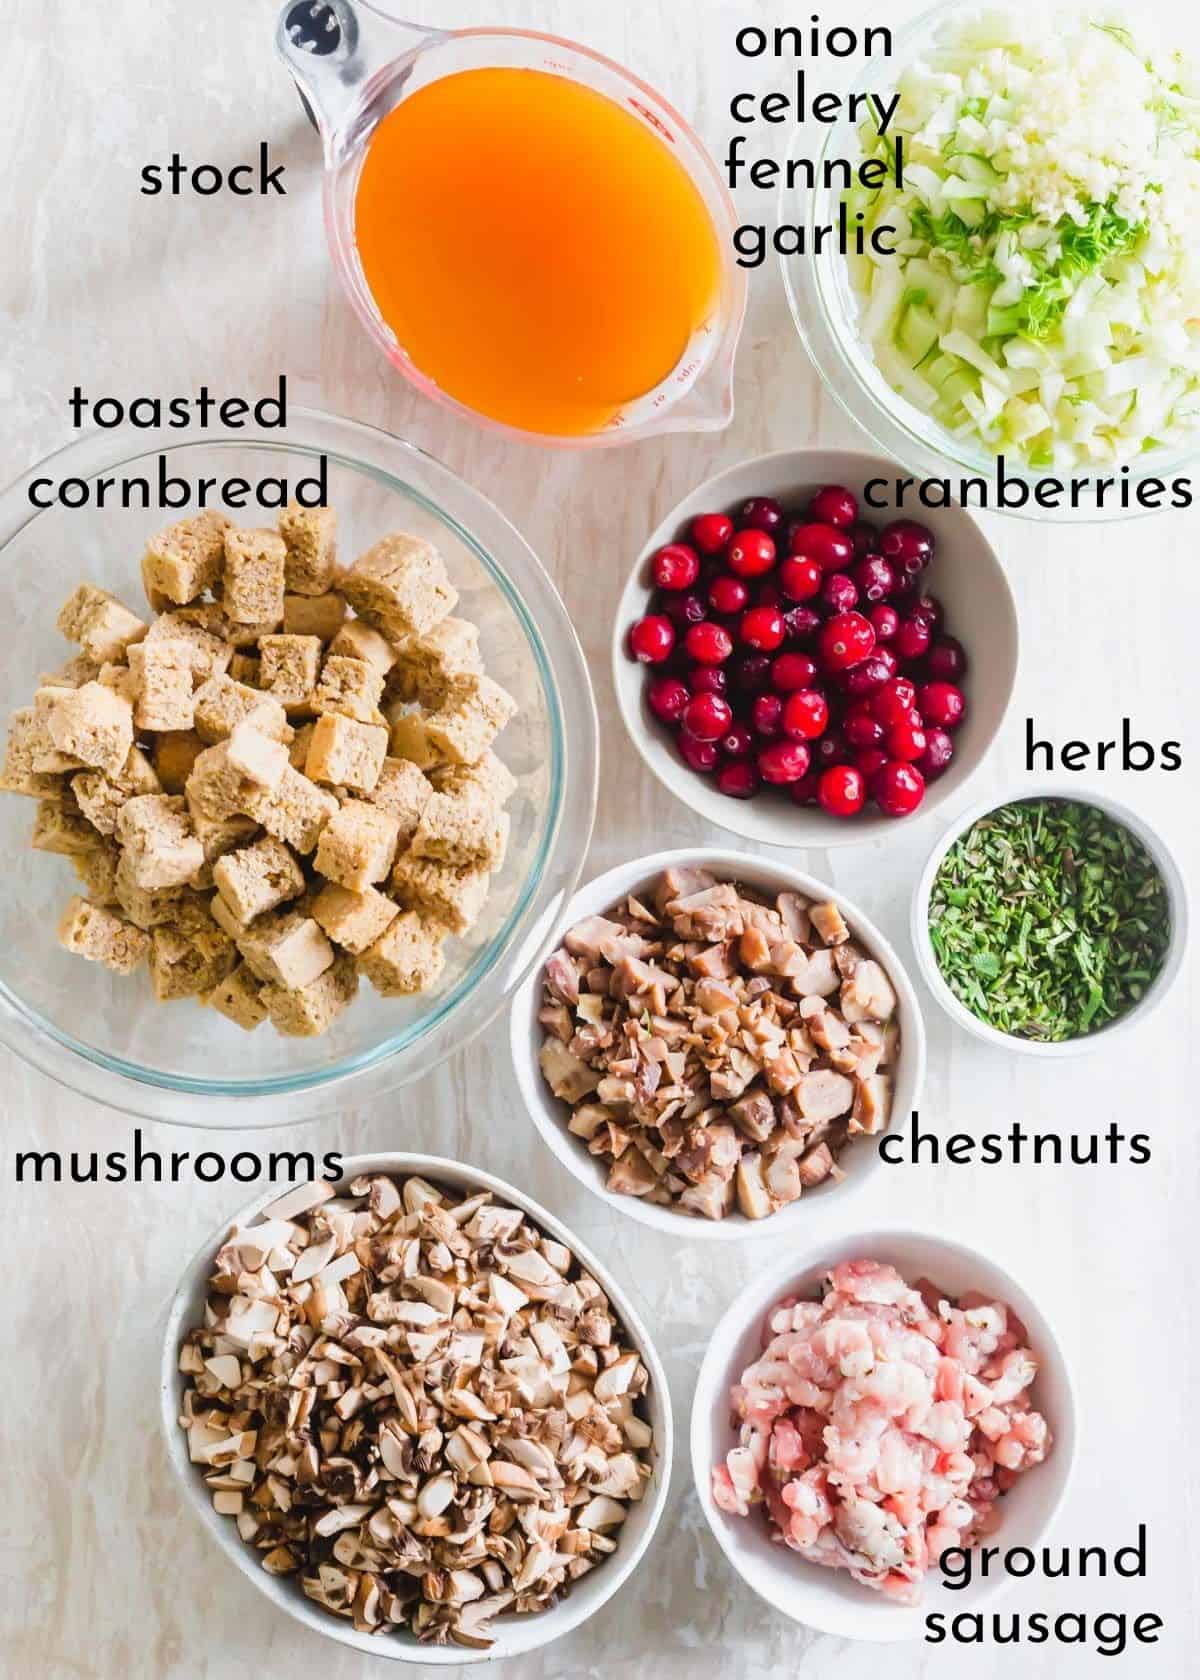 Ingredients to make chestnut stuffing including cornbread, cranberries, sausage, mushrooms, fresh herbs, onion, celery and fennel.